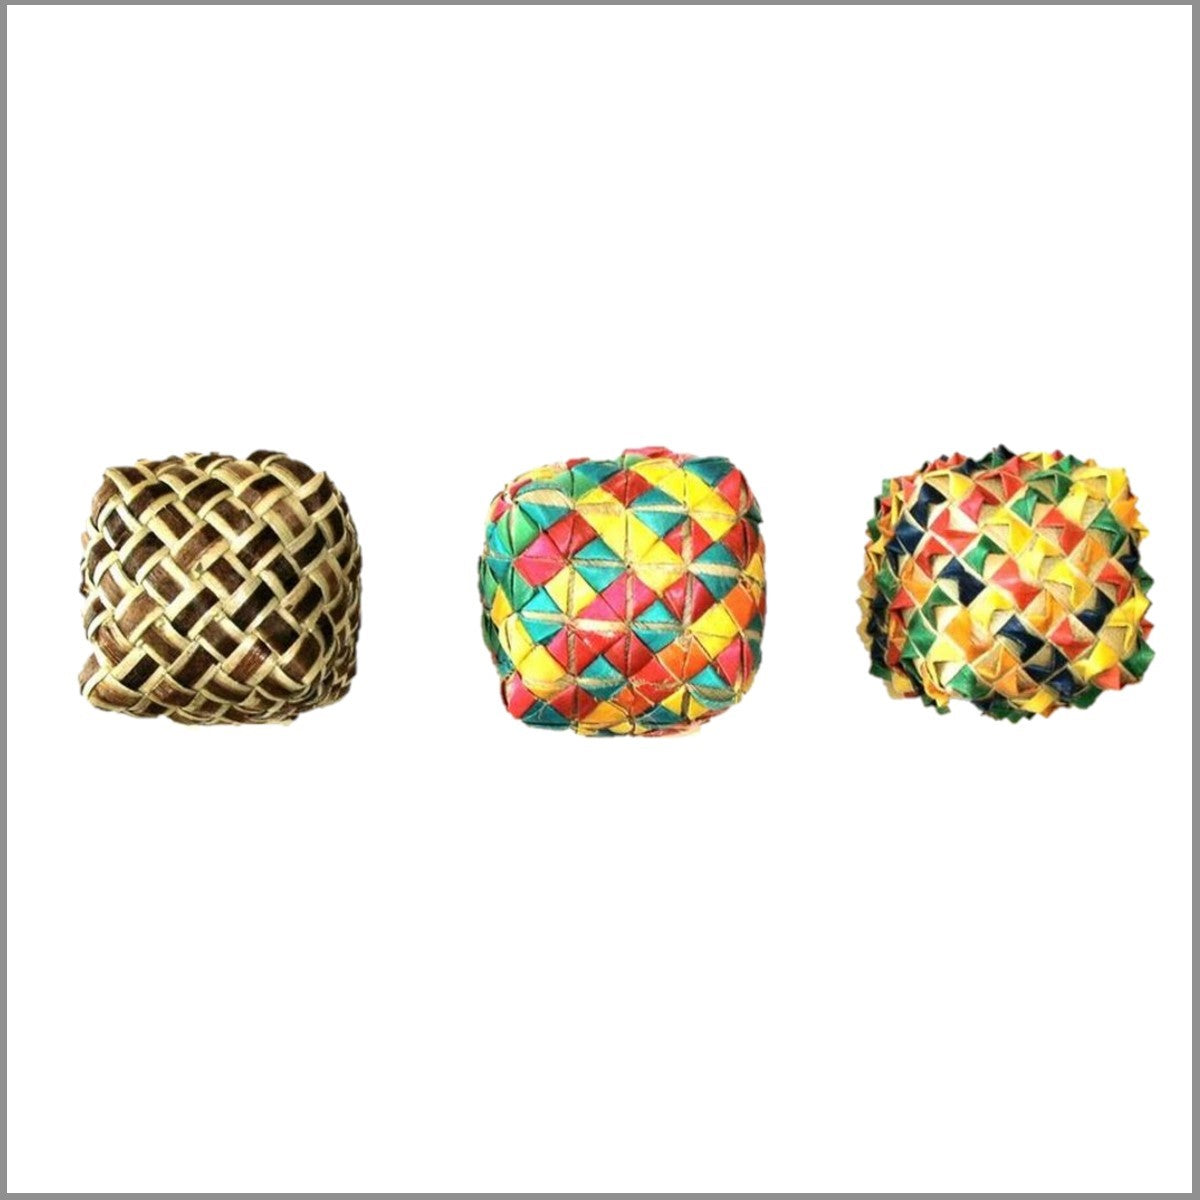 Planet Pleasures Square Woven Foot Toy Lg